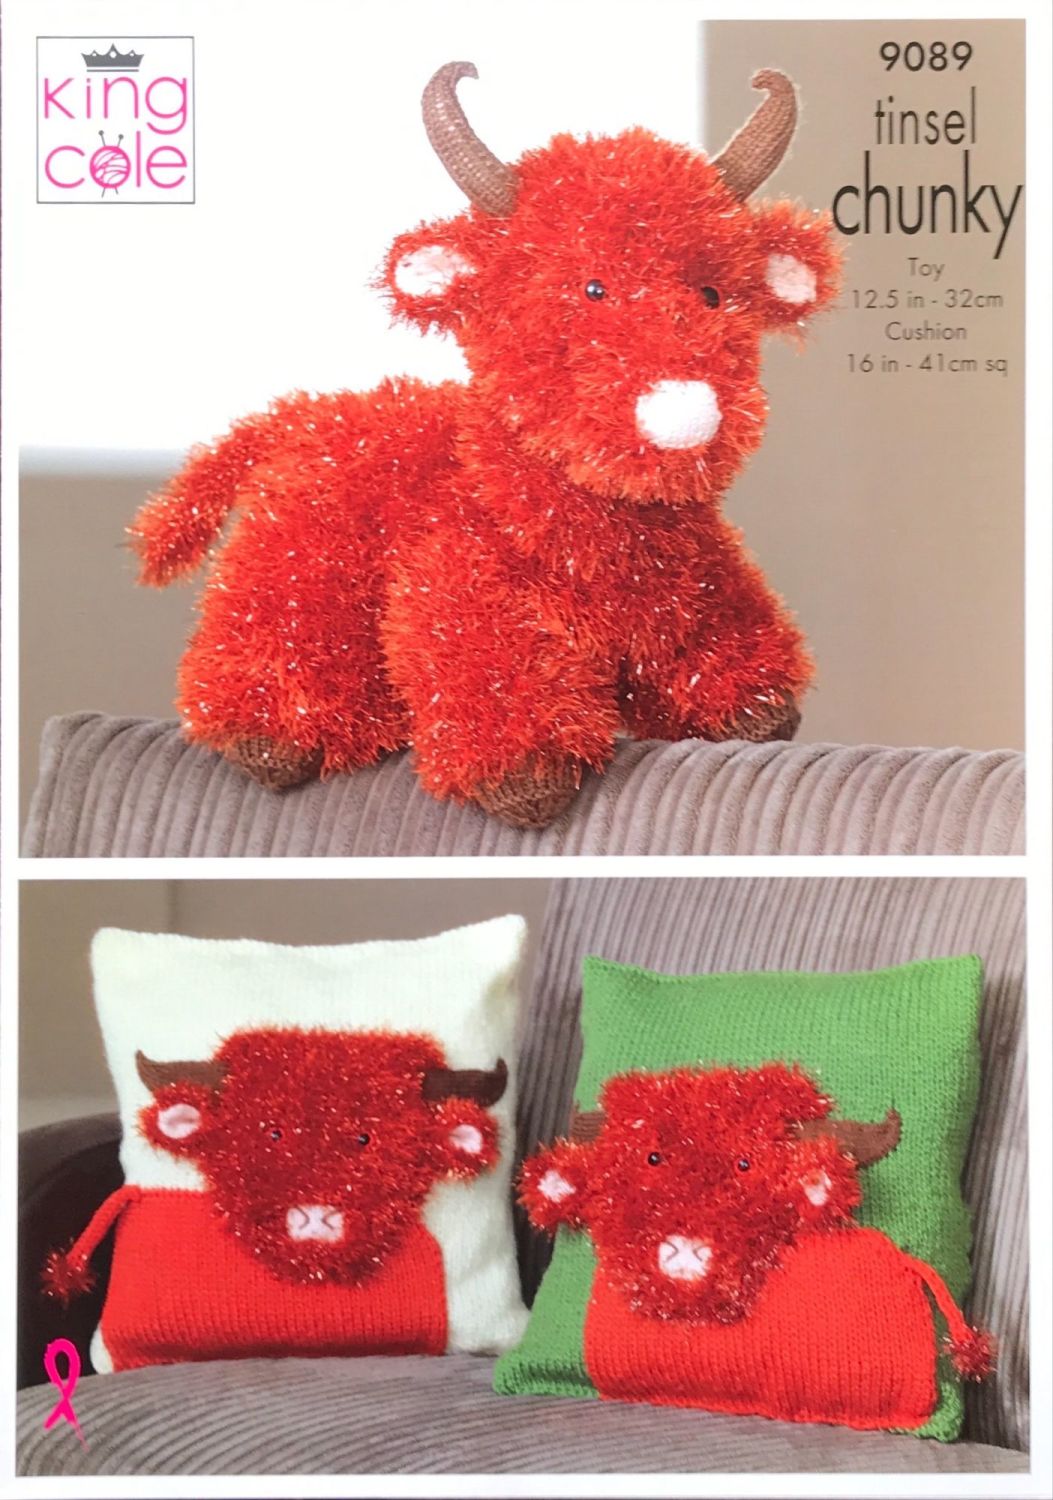 King Cole Pattern 9089 Tinsel Highland Cow & Cushion Cover